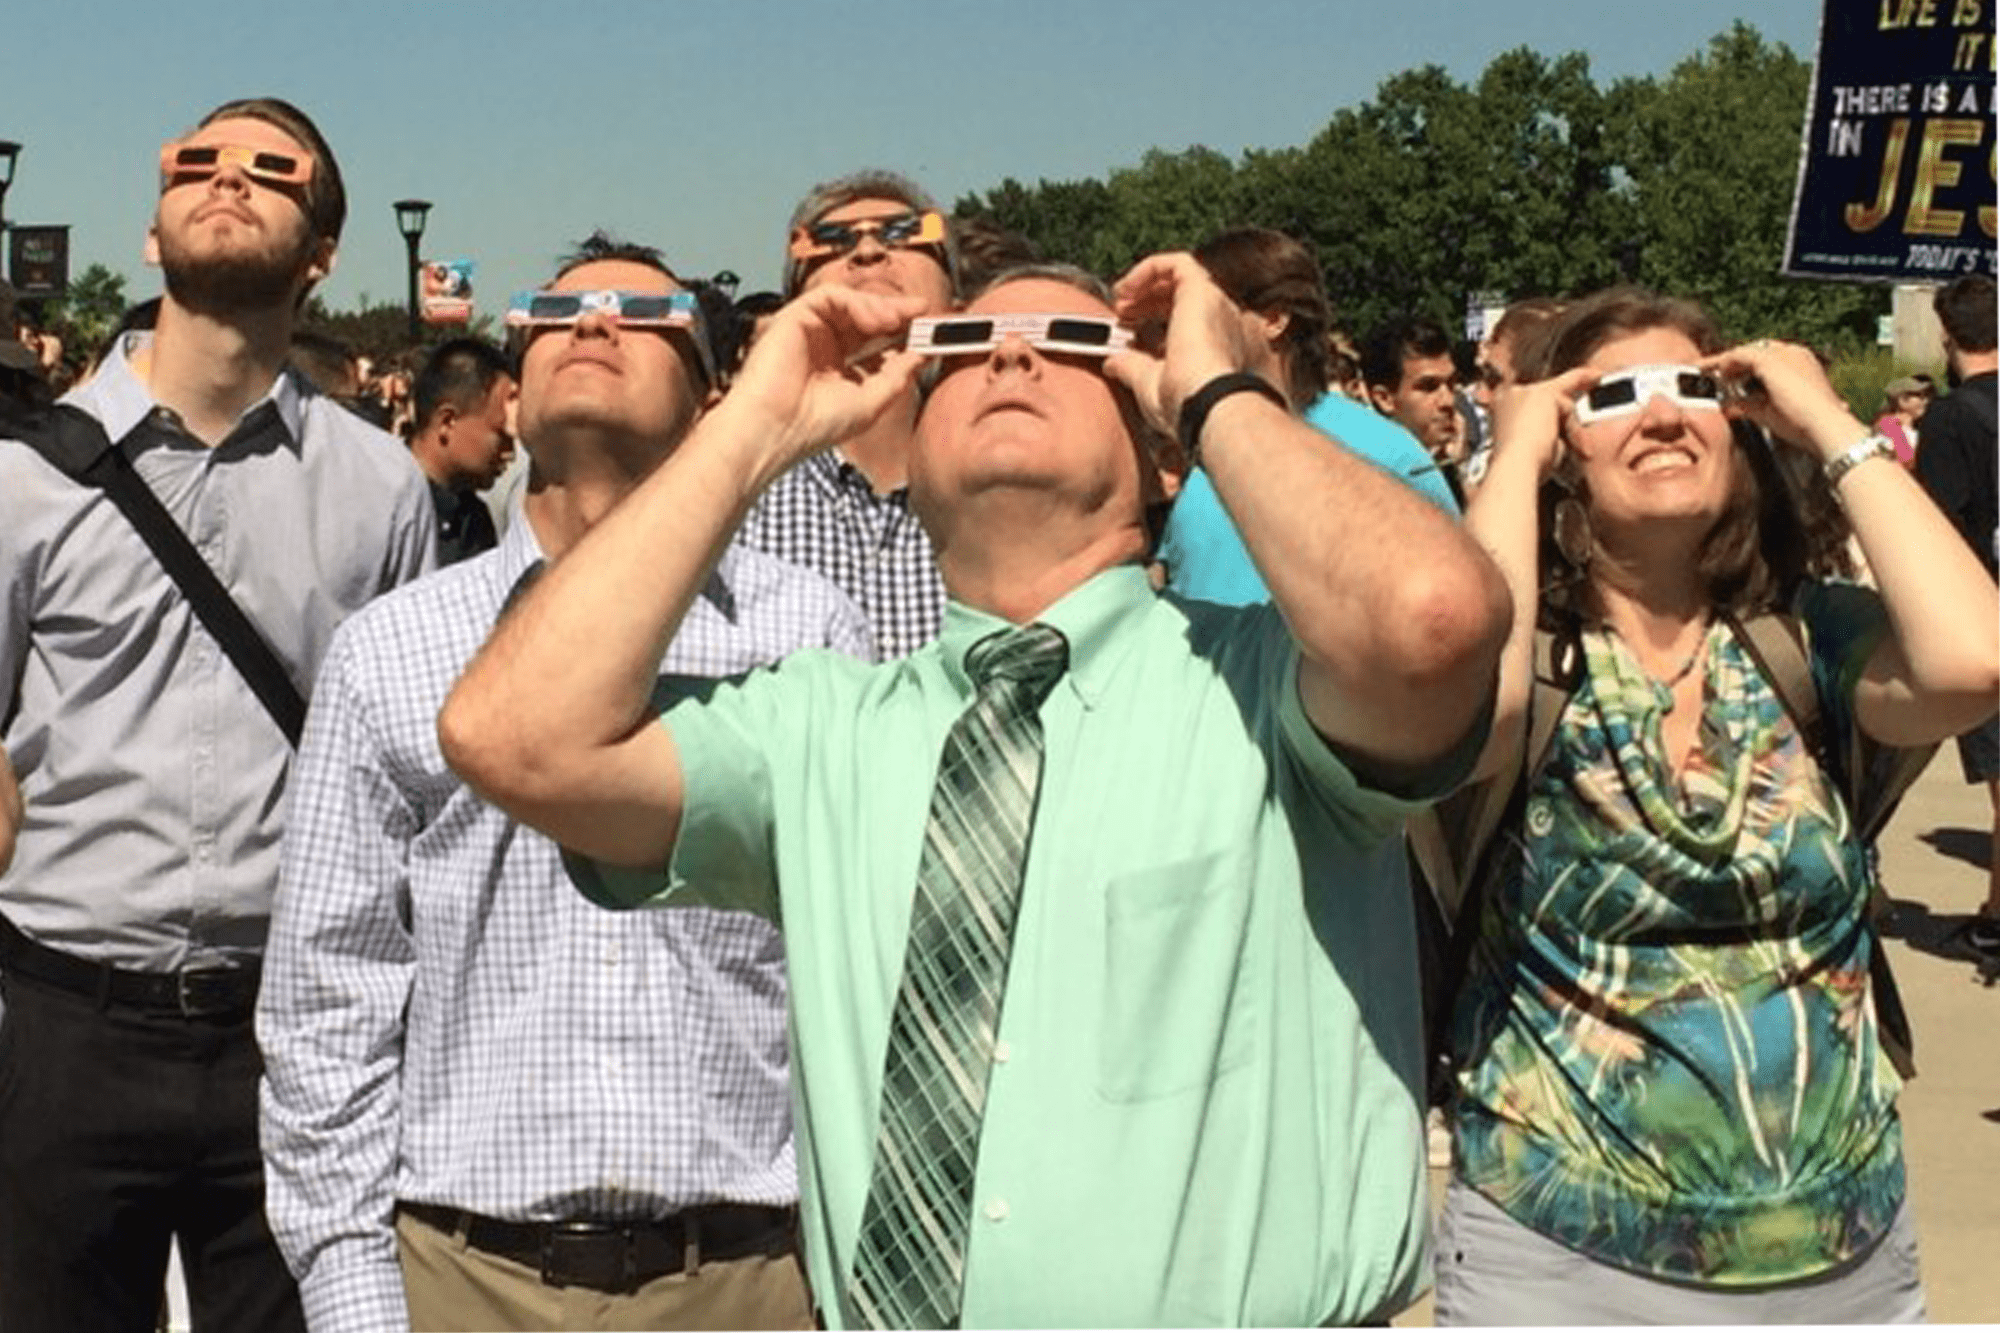 Retro image of people in business casual looking at the sky with eclipse safety glasses